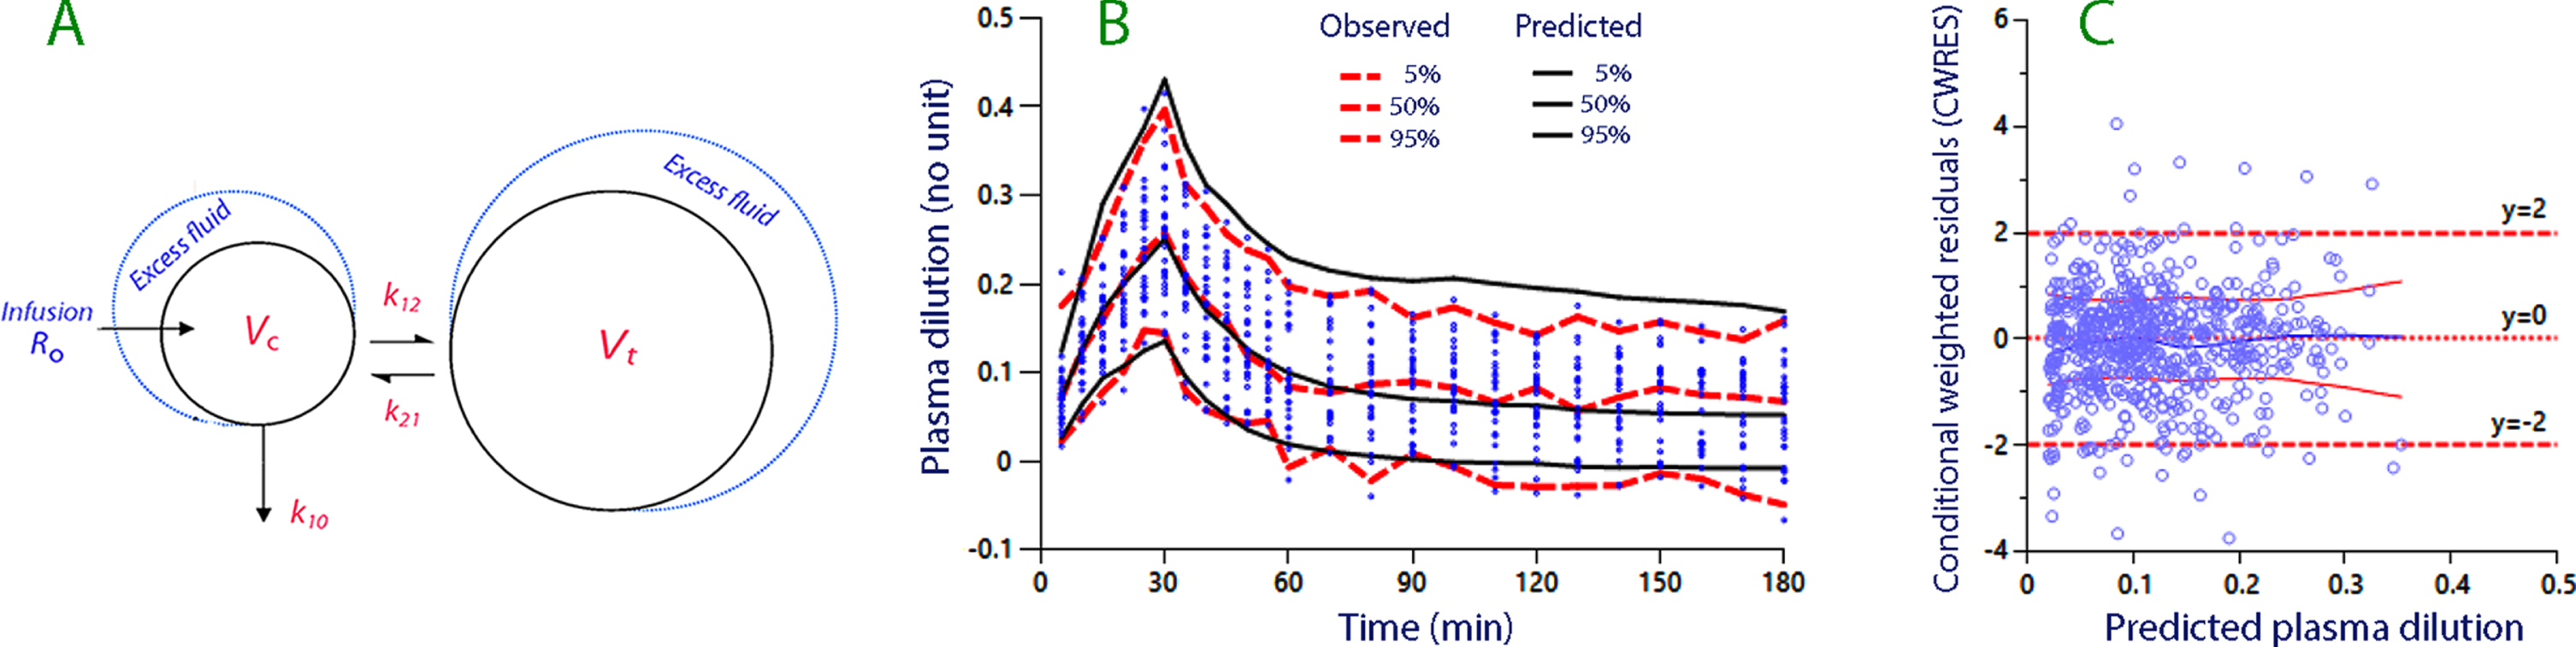 (A) The kinetic model used for analysis and simulation. (B) Predictive check based on 1,000 simulations using a built-in function in the Phoenix software. Close agreement between the observed and predicted percentiles indicates that the model is robust. (C) The conditional weighted residuals (CWRES) versus the predicted plasma dilution, without considering the individual-specific covariates.